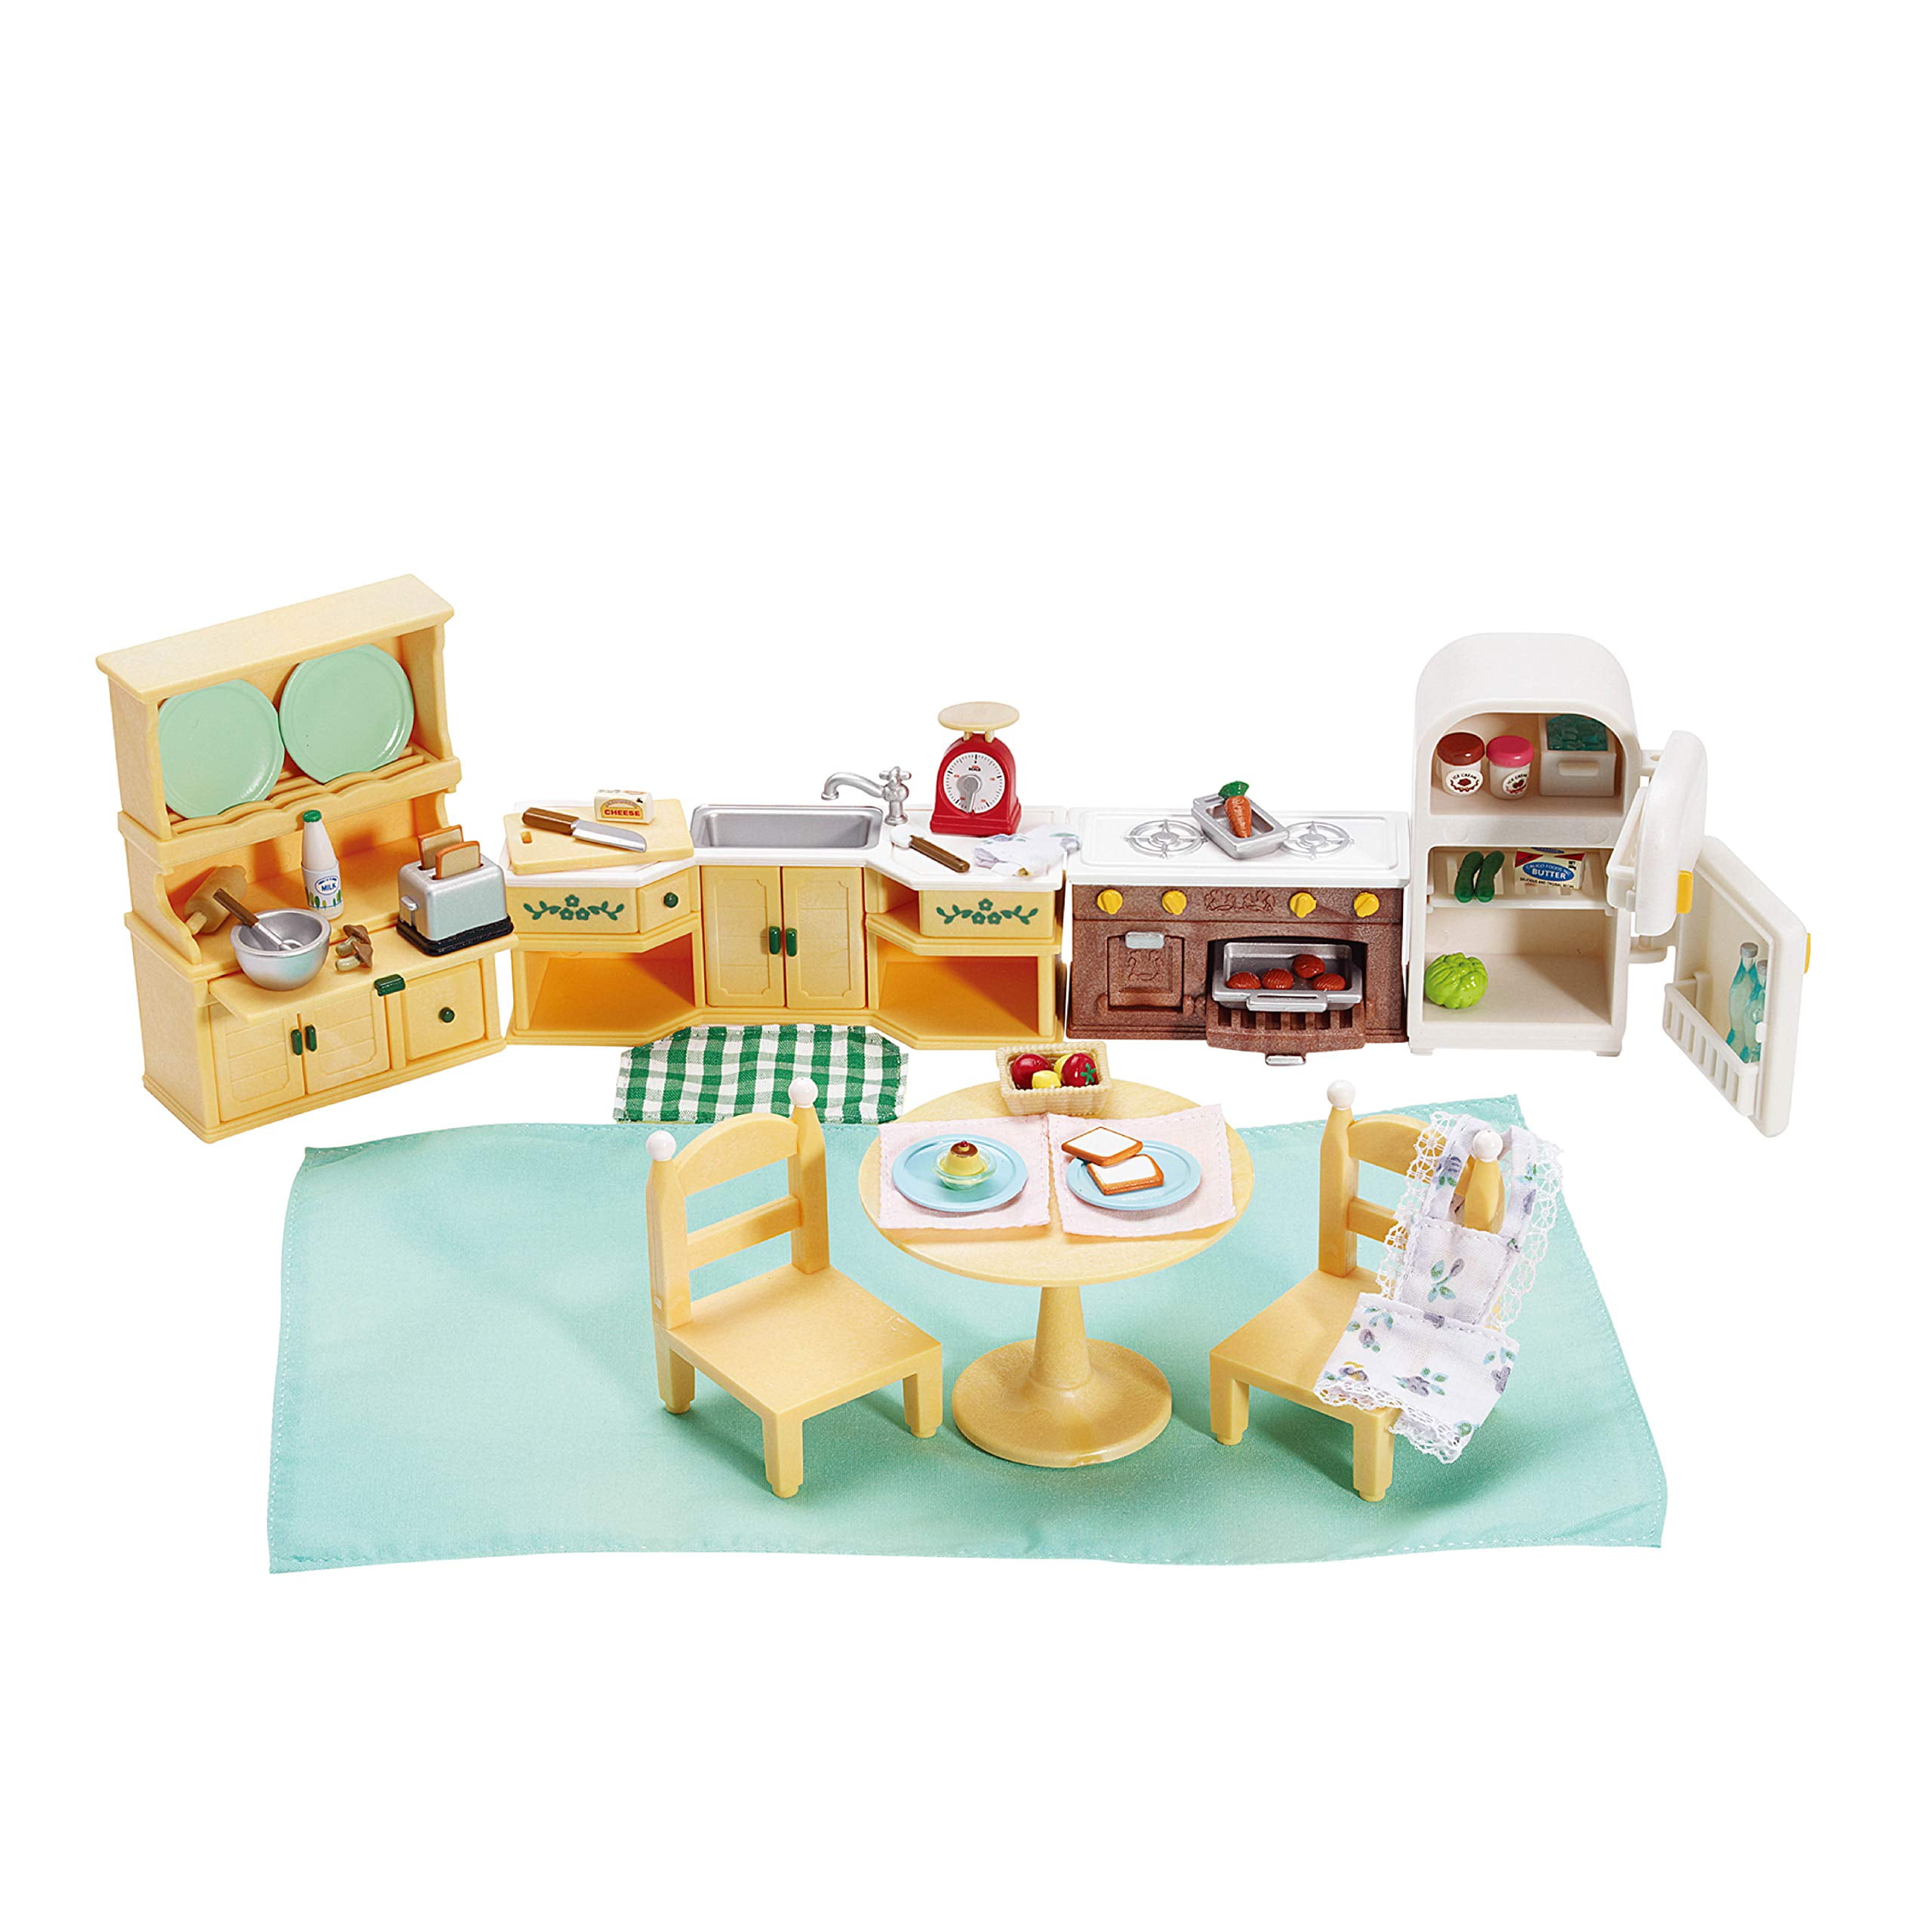 Calico Critters Deluxe Bathroom components 15pc set 